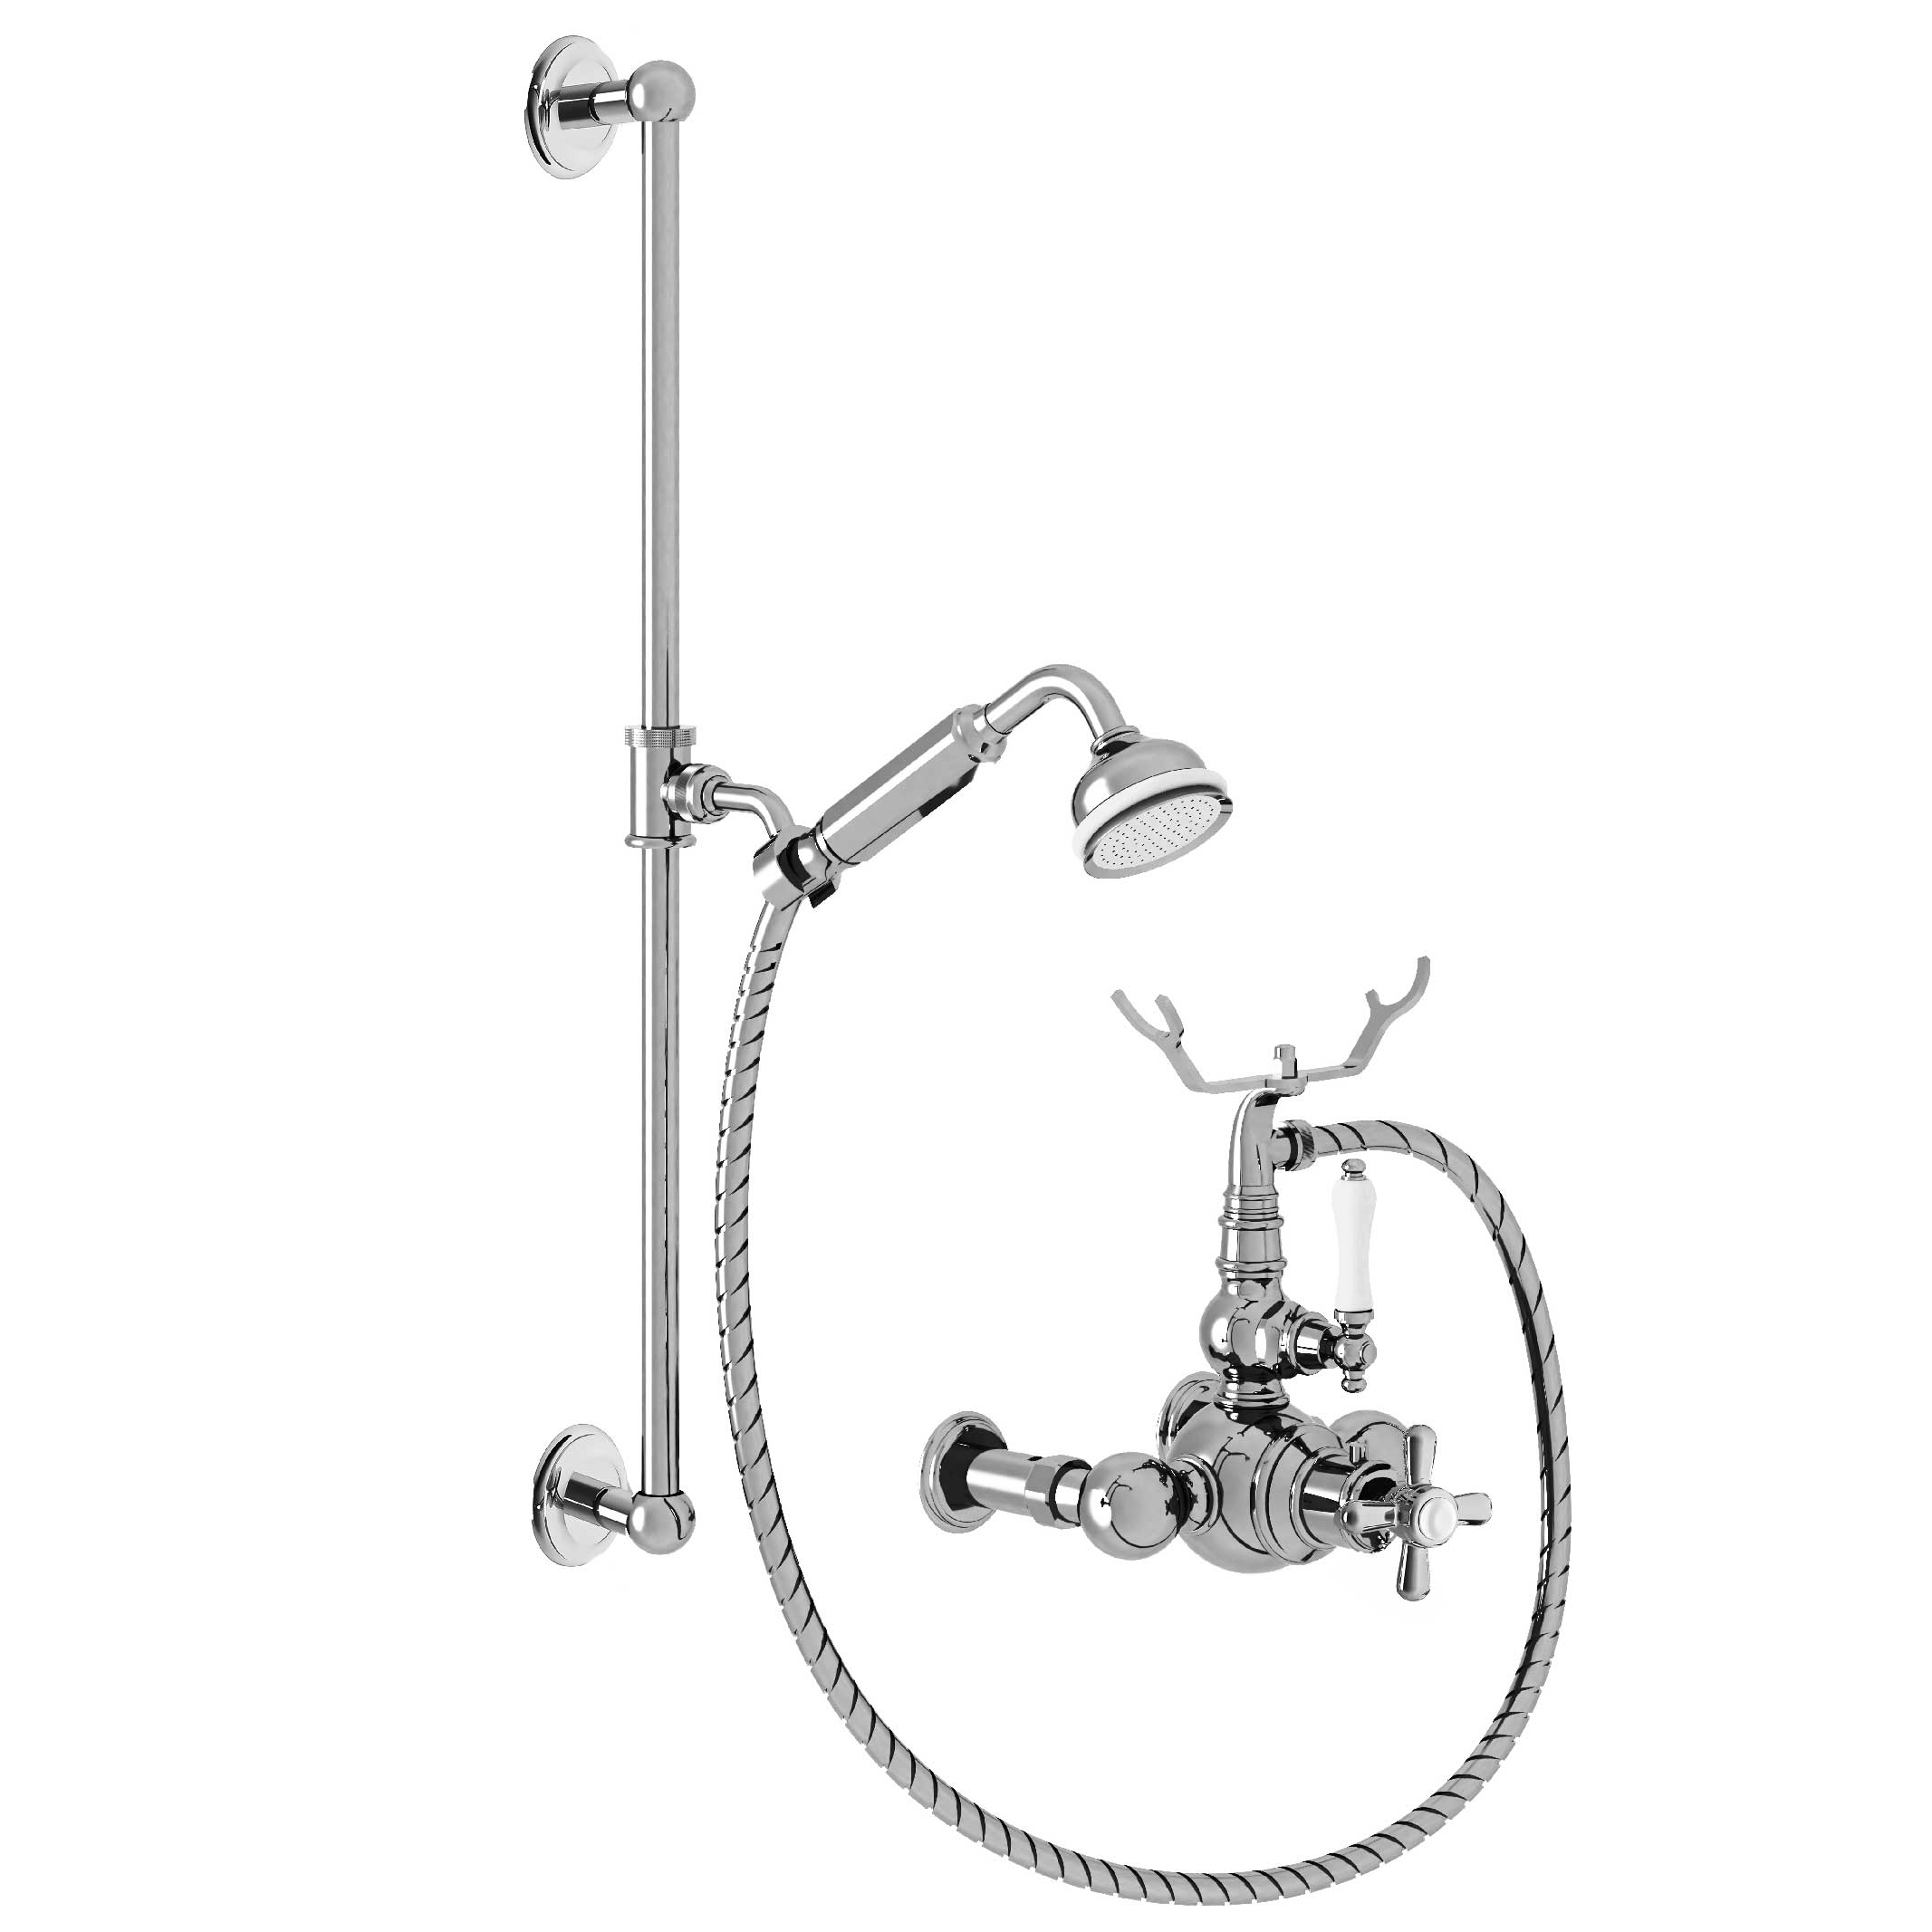 M40-2202T Mitigeur thermo. douche, coulidouche